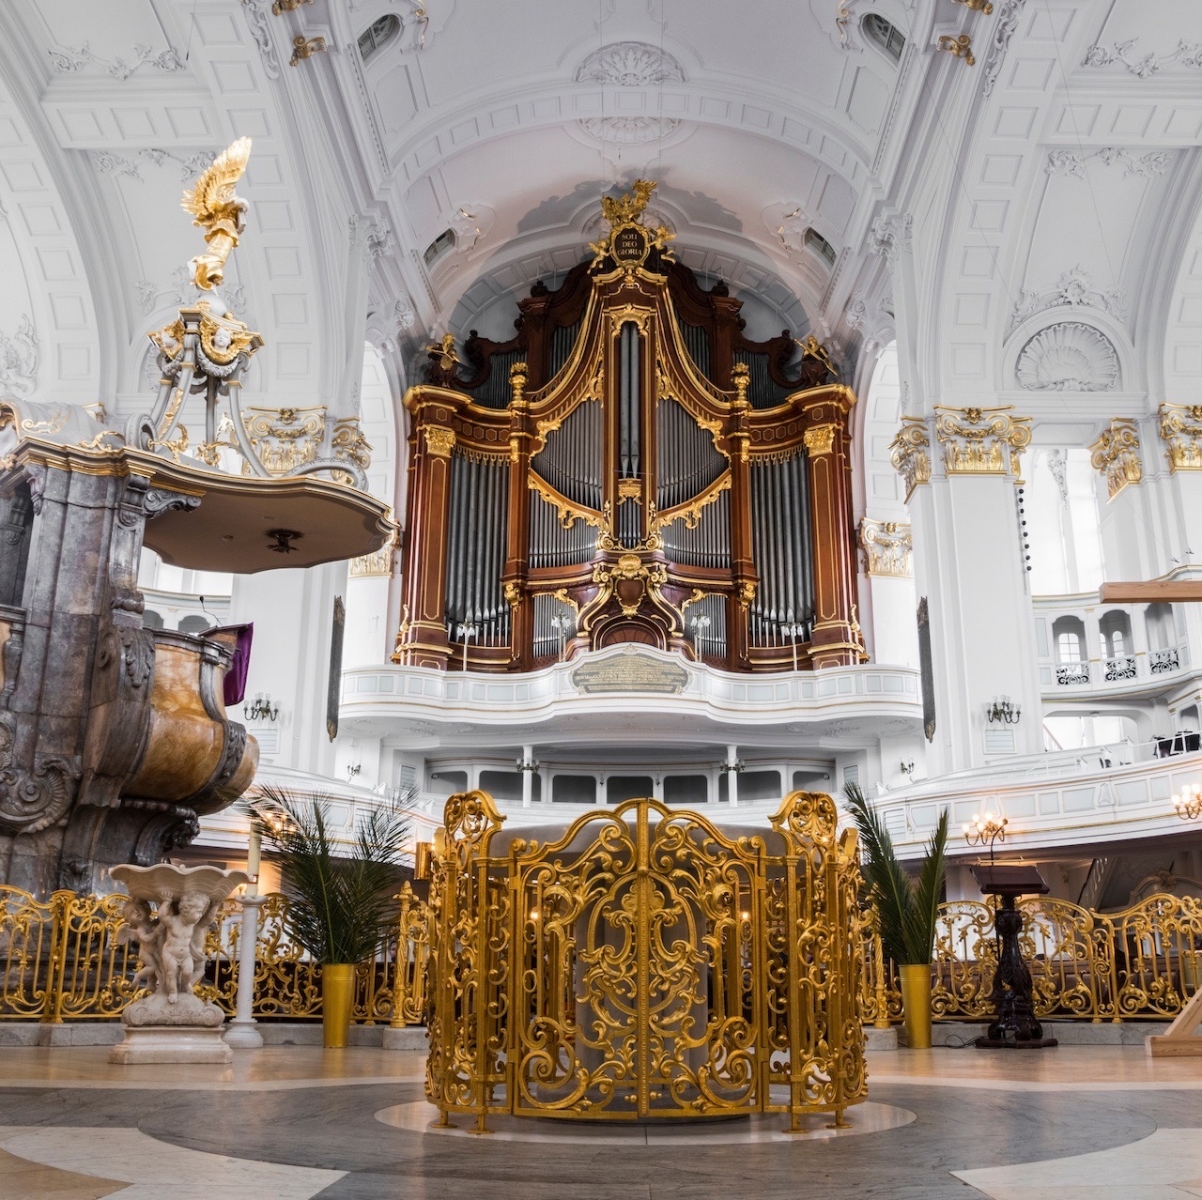 Interior view of St. Michael's Church (Hauptkirche Sankt Michaelis), one of Hamburg's five Lutheran main churches (Hauptkirchen) and the most famous church in the city of Hamburg, Germany